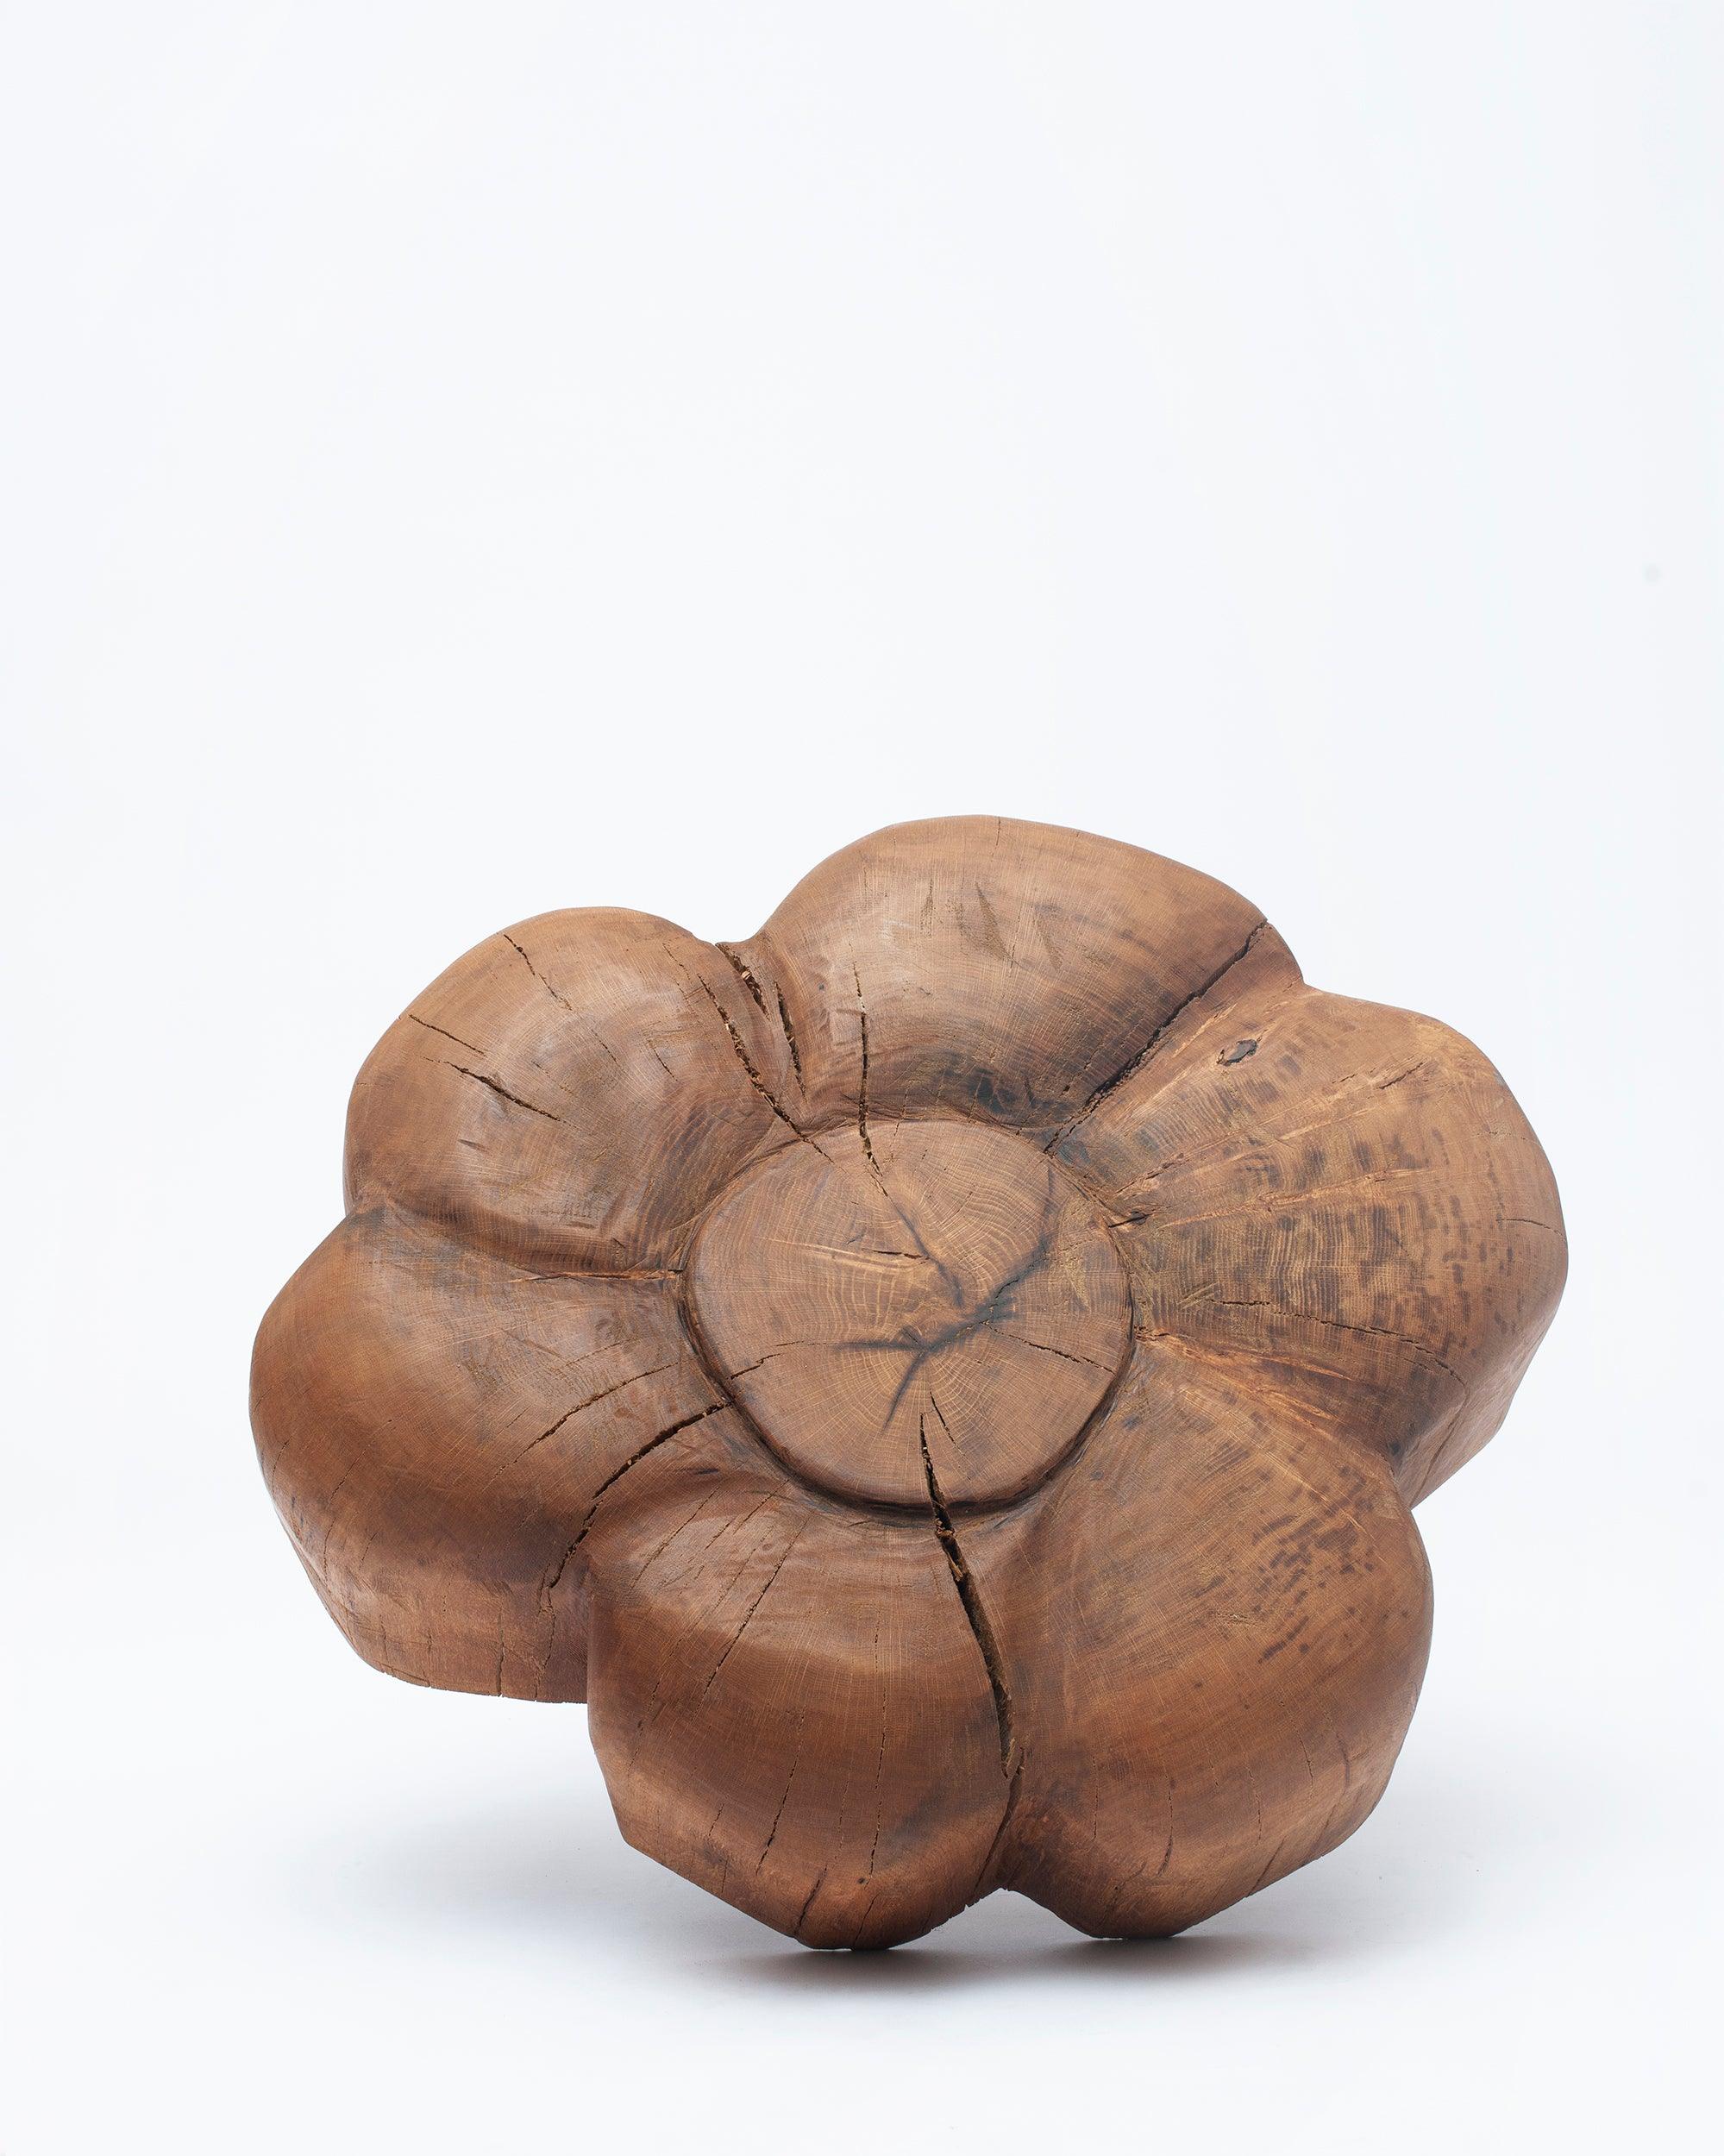 White background, hand-carved wooden with vileplume design in front position